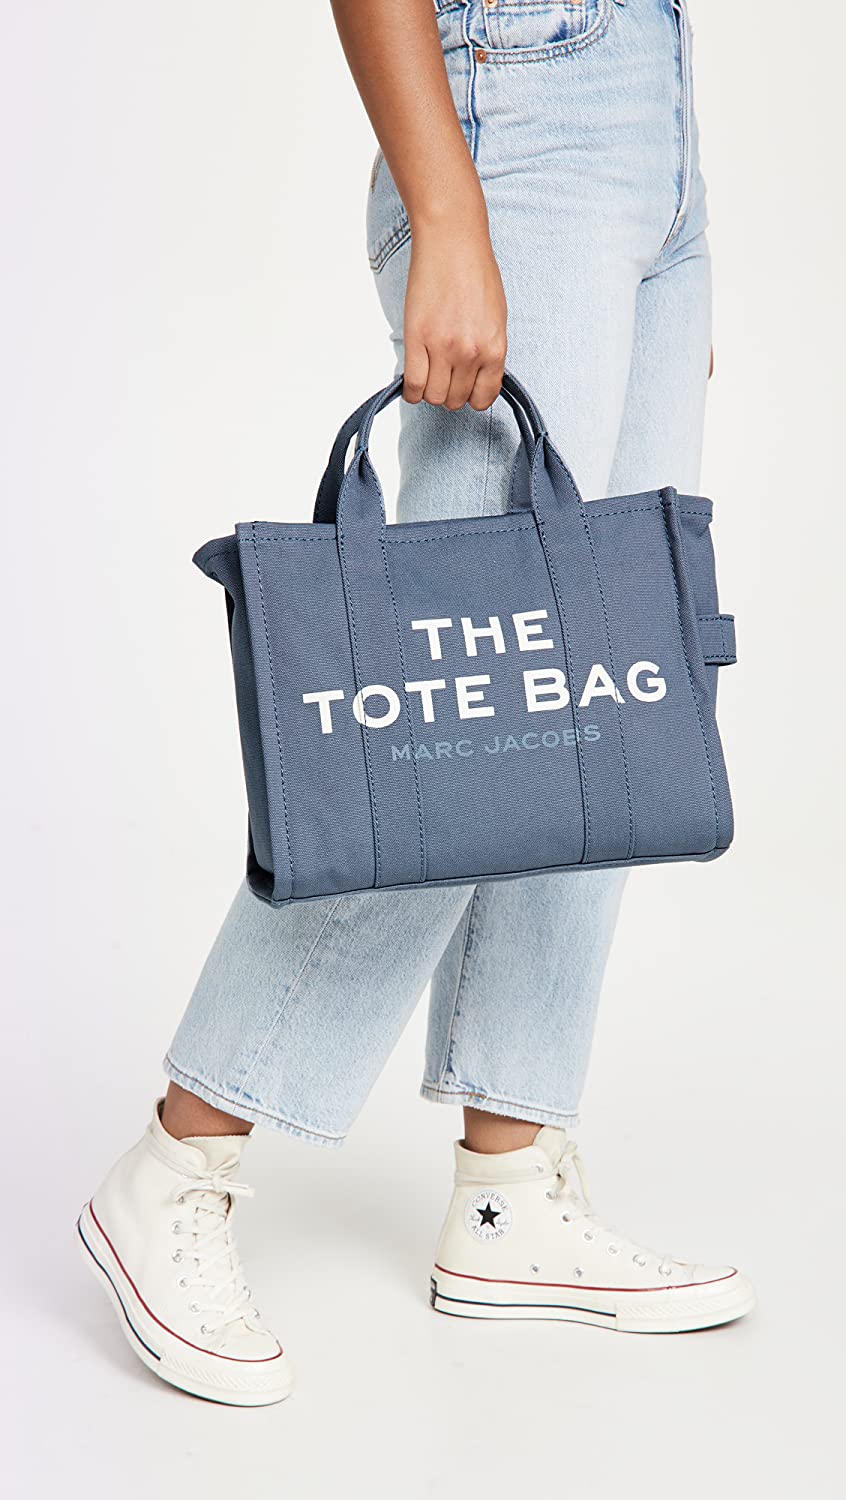 Best The Tote Bag Marc Jacobs – March 2023